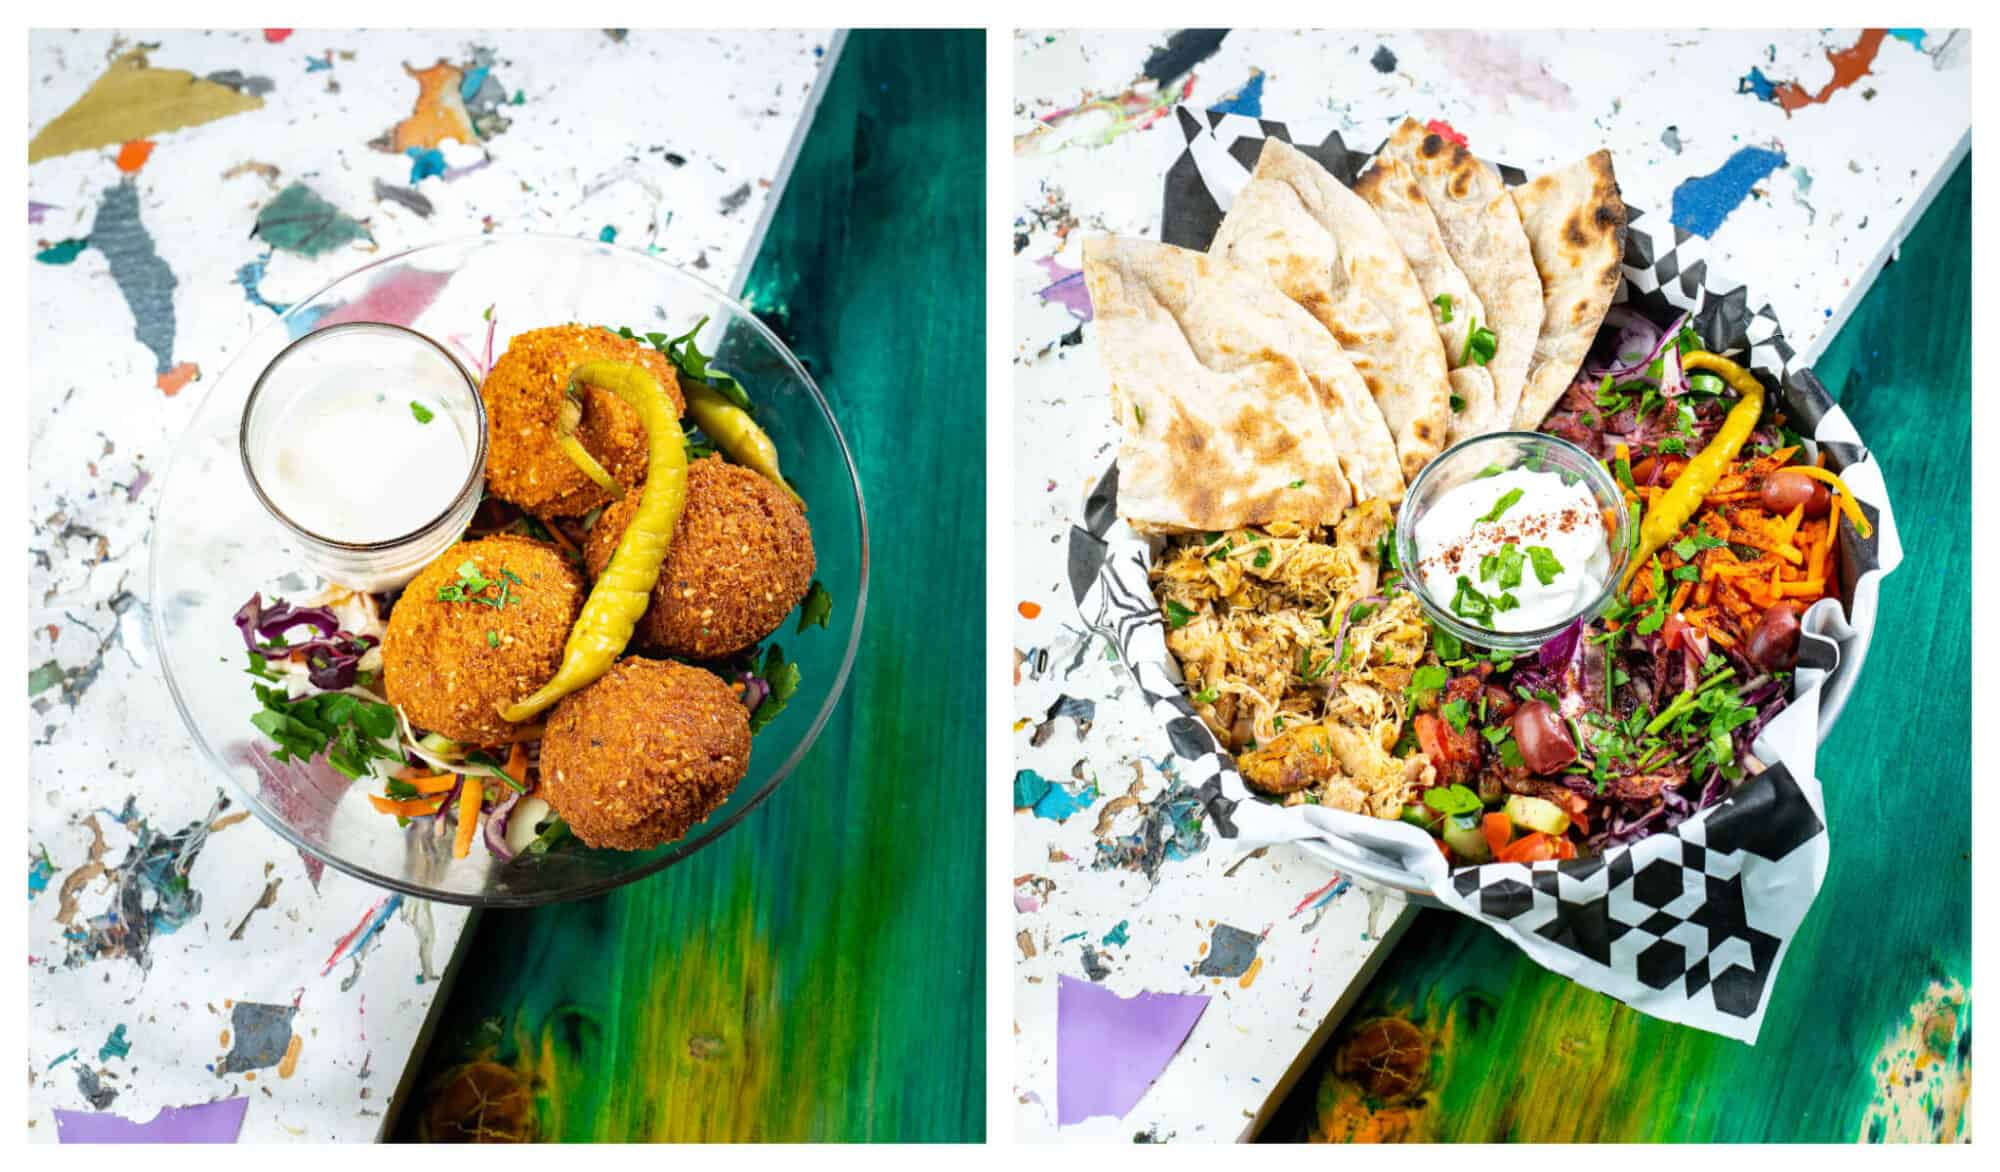 Left: A bowl with 4 falafels and a white dip. Right: a bowl of middle eastern food with colorful salad, pita bread, chicken, and a white garlic dip in the center.